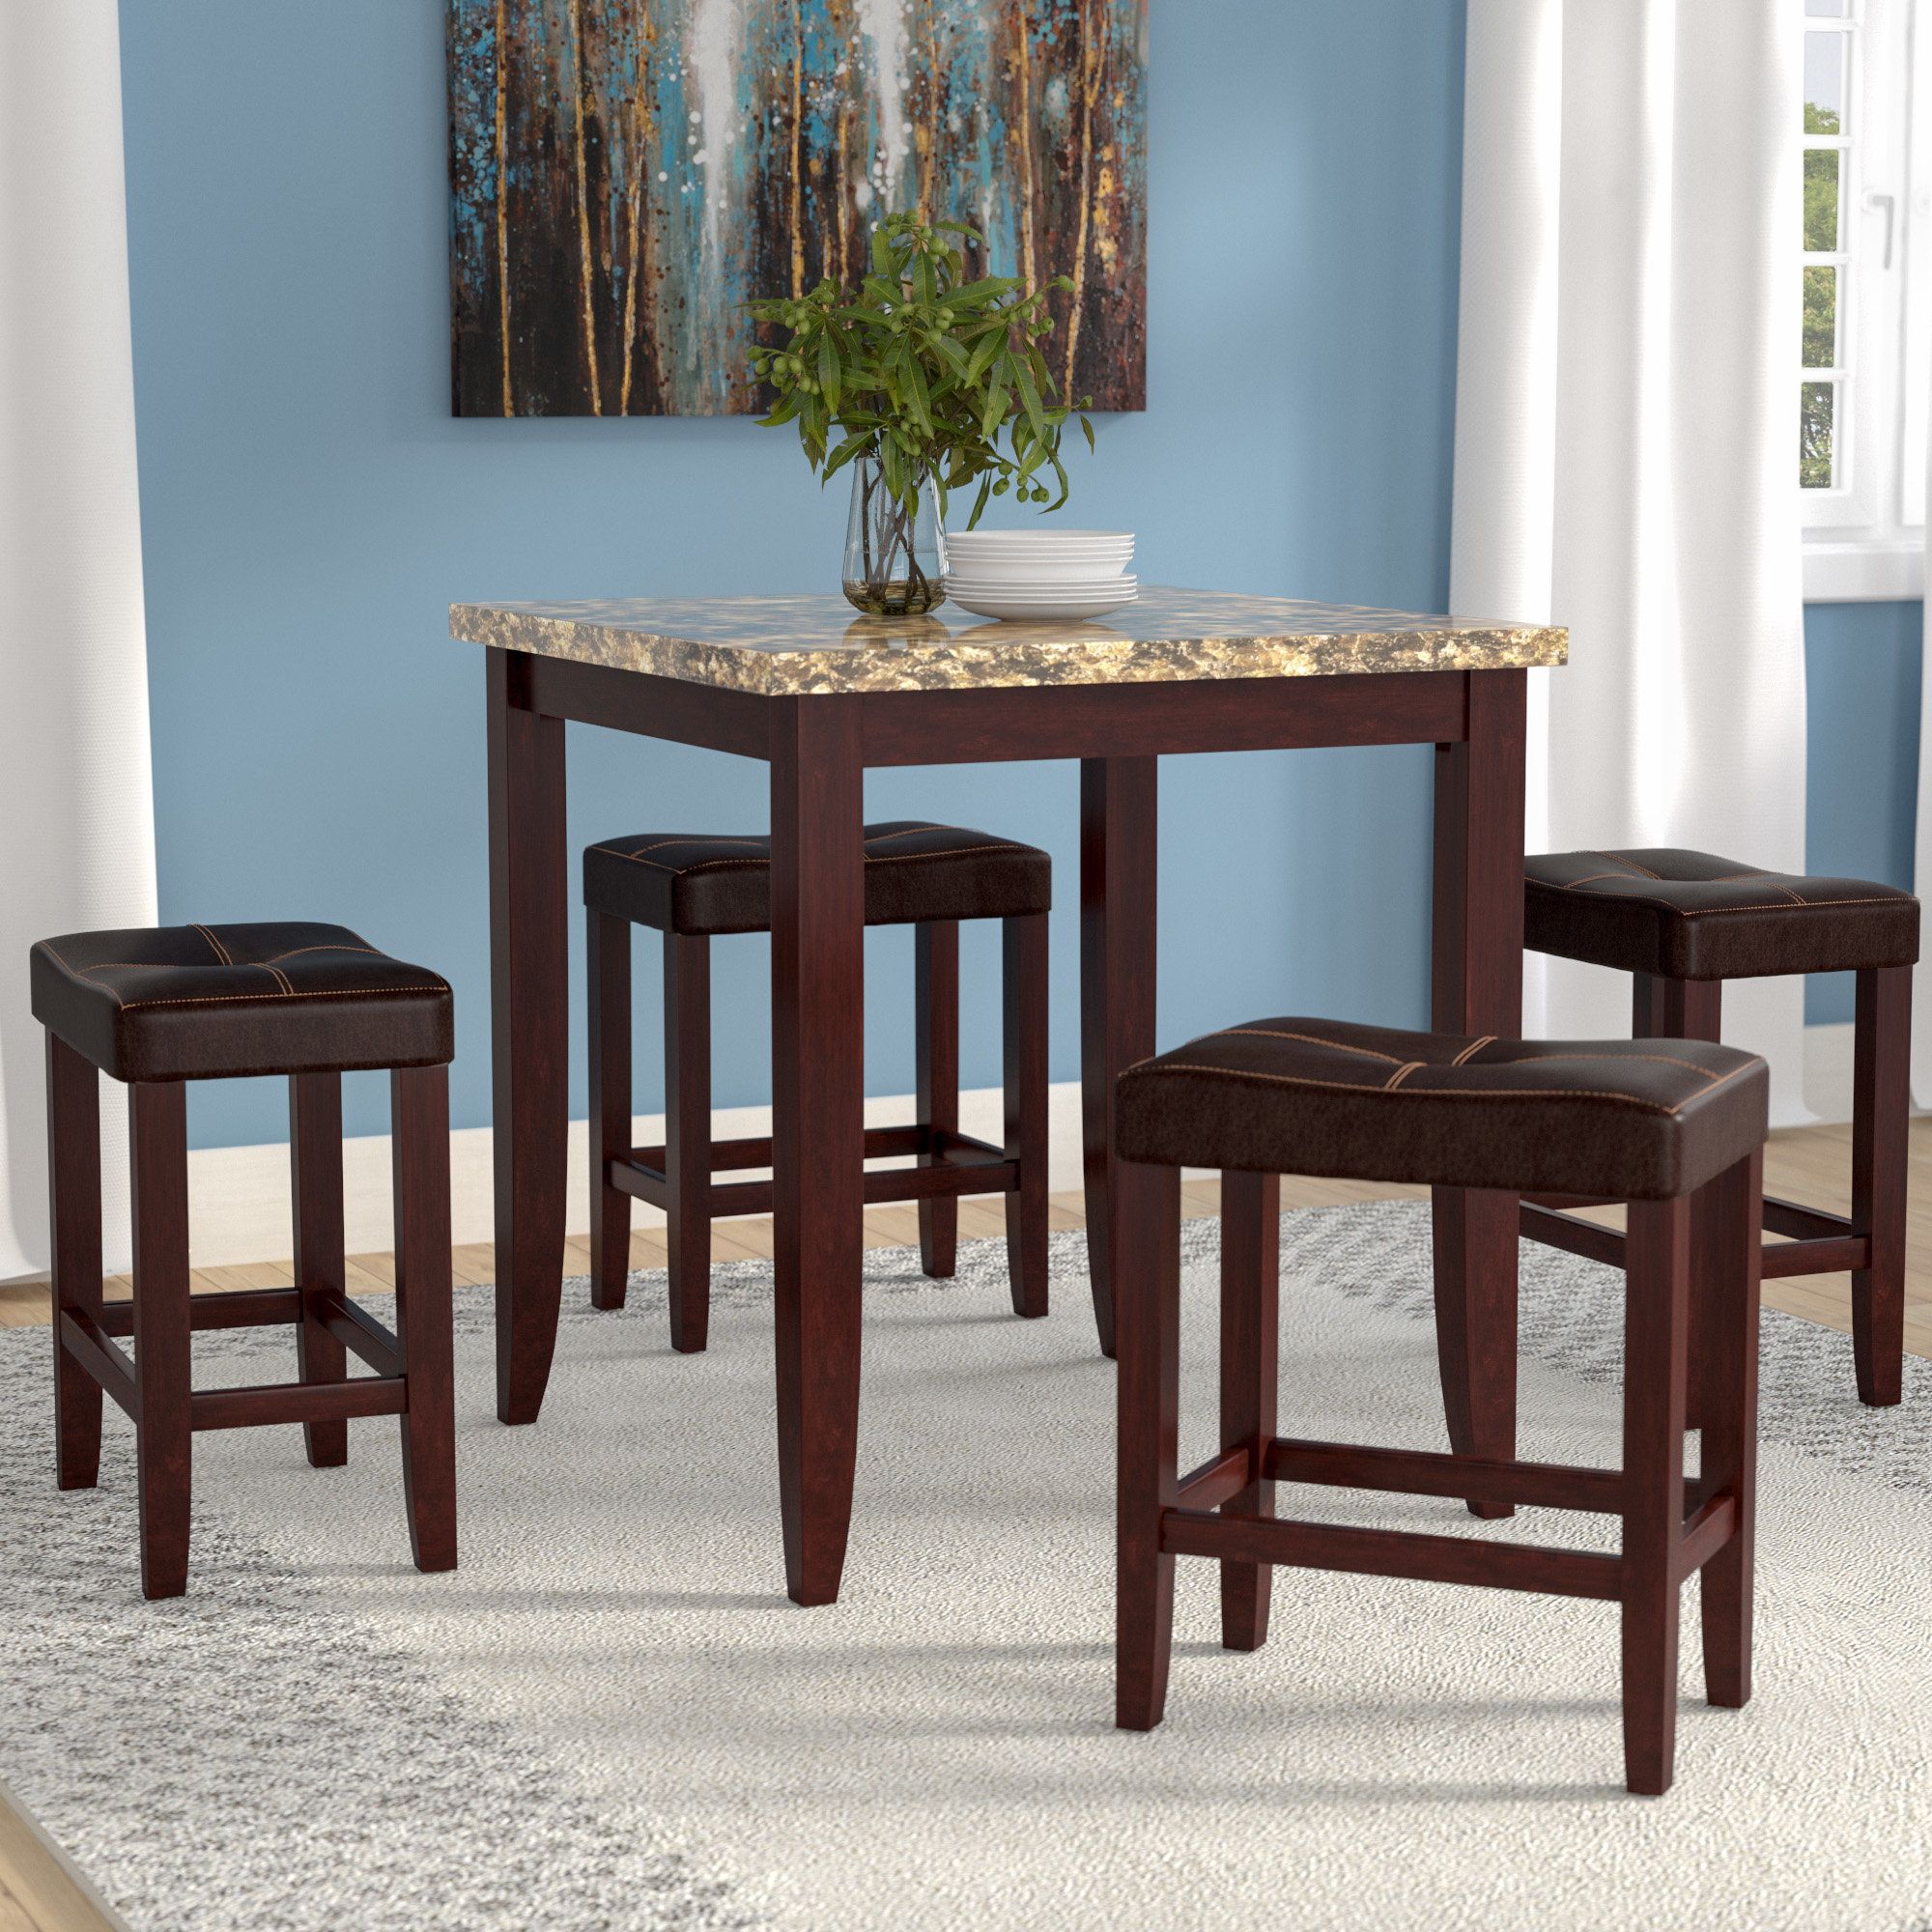 Most Current Latitude Run Dejean 5 Piece Counter Height Dining Set & Reviews In Askern 3 Piece Counter Height Dining Sets (set Of 3) (View 8 of 20)